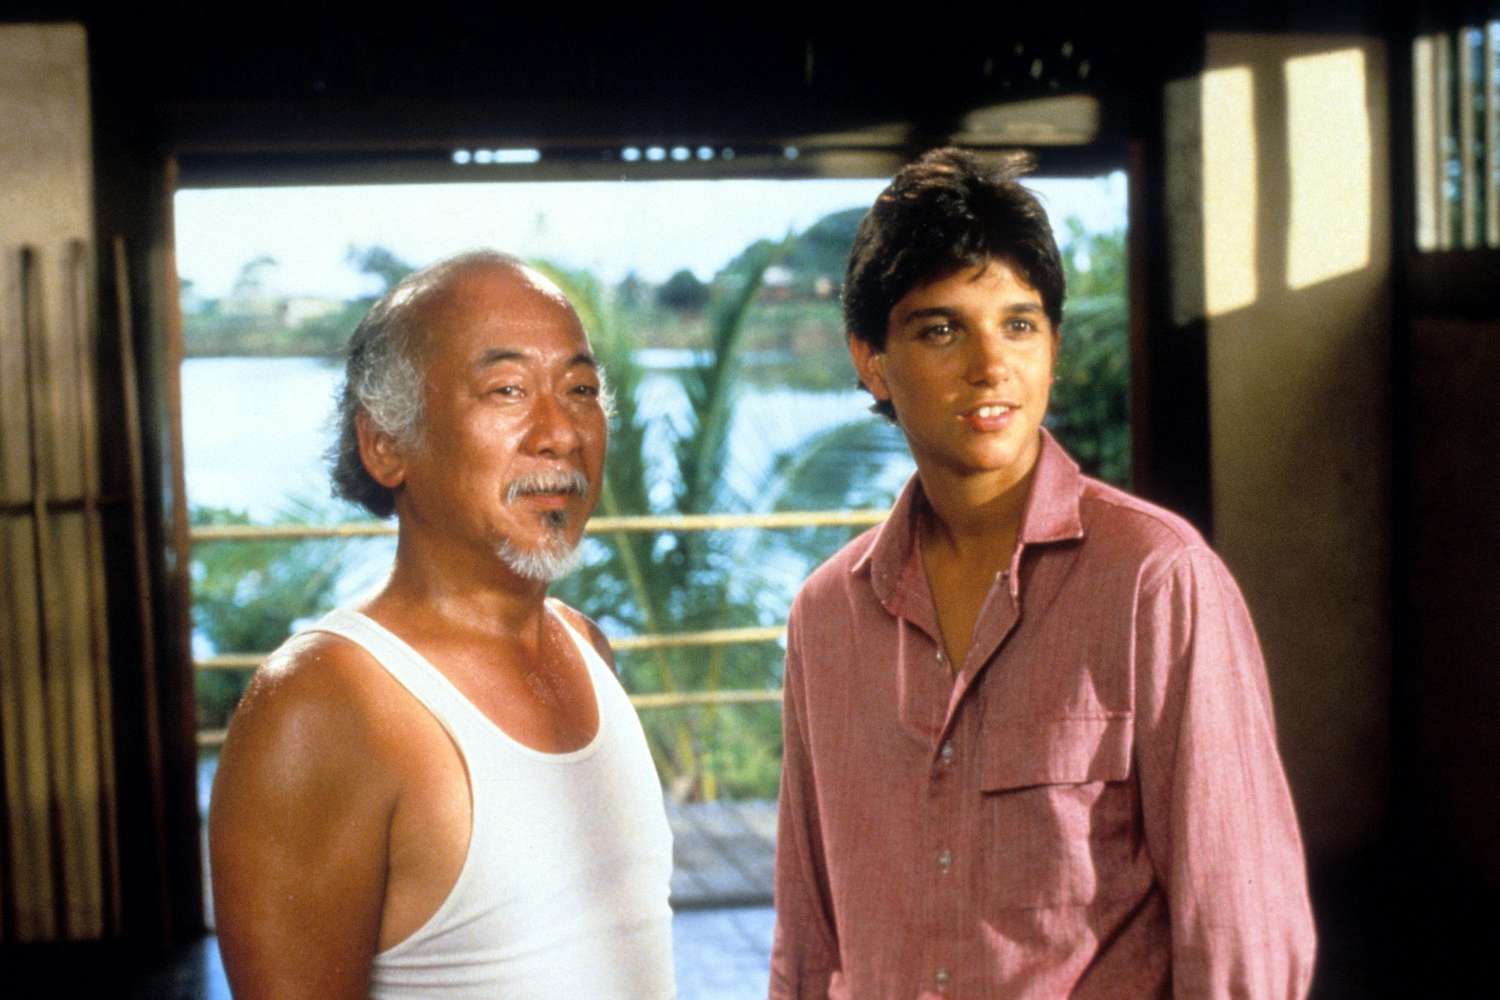 The Karate Kid stars, then and now